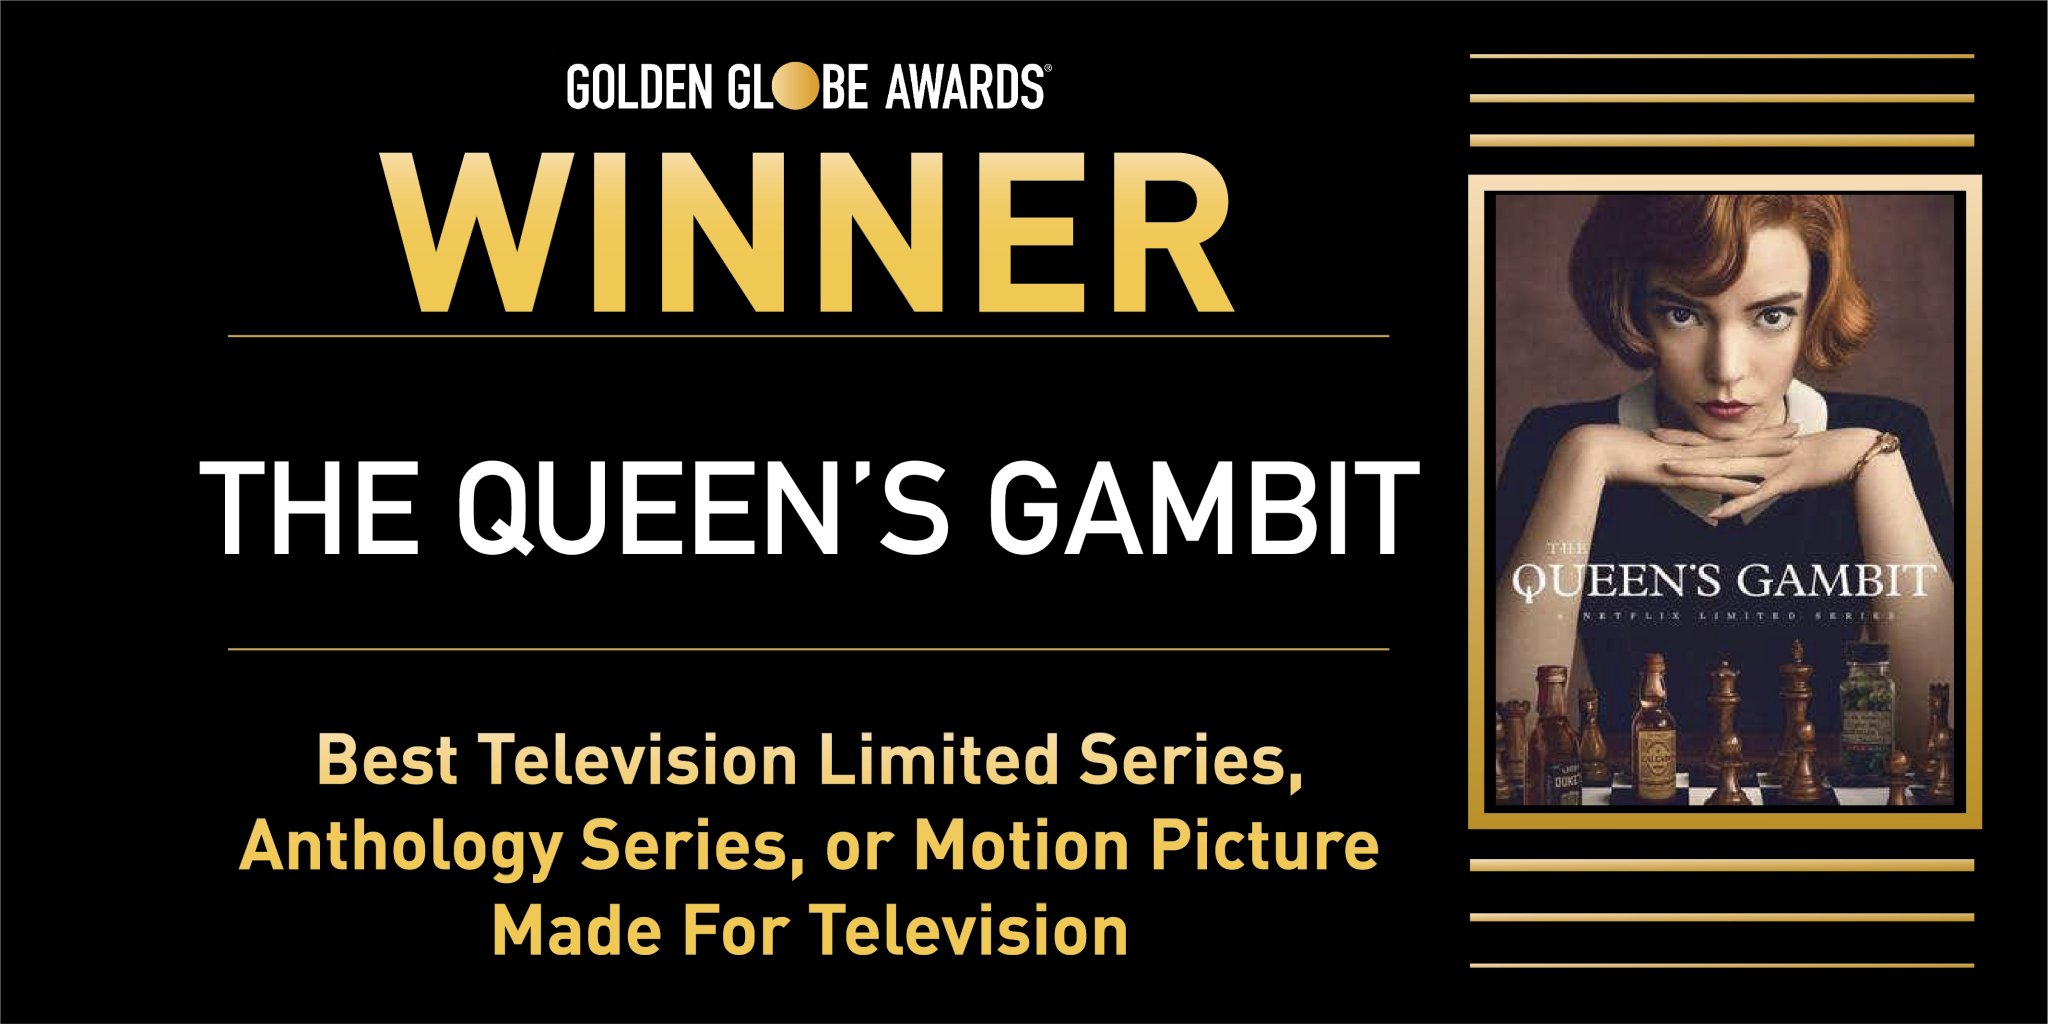 The Queen's Gambit' Is the Grand Master of the Limited Series